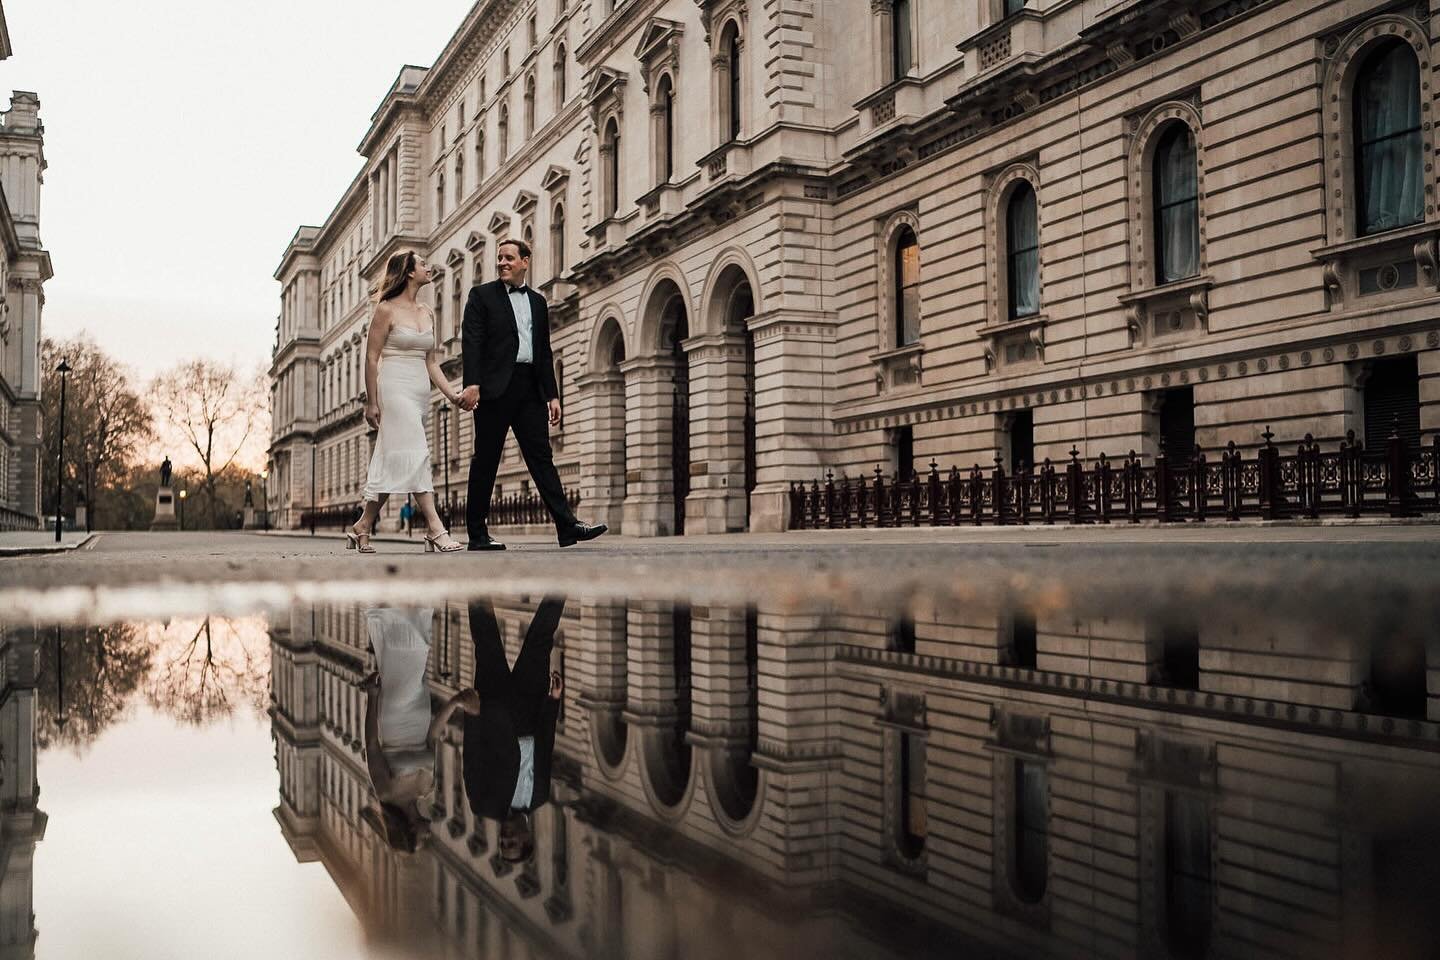 Busy weekend of couple shoots! Starting with Haley + Jacob and an explore of Westminster.
.
.
.
.
.
#londonphotographer #londonweddingphotographer #londonmicrowedding #londonweddingphotography #westminster #londoncoupleshoot #londonengagementphotogra